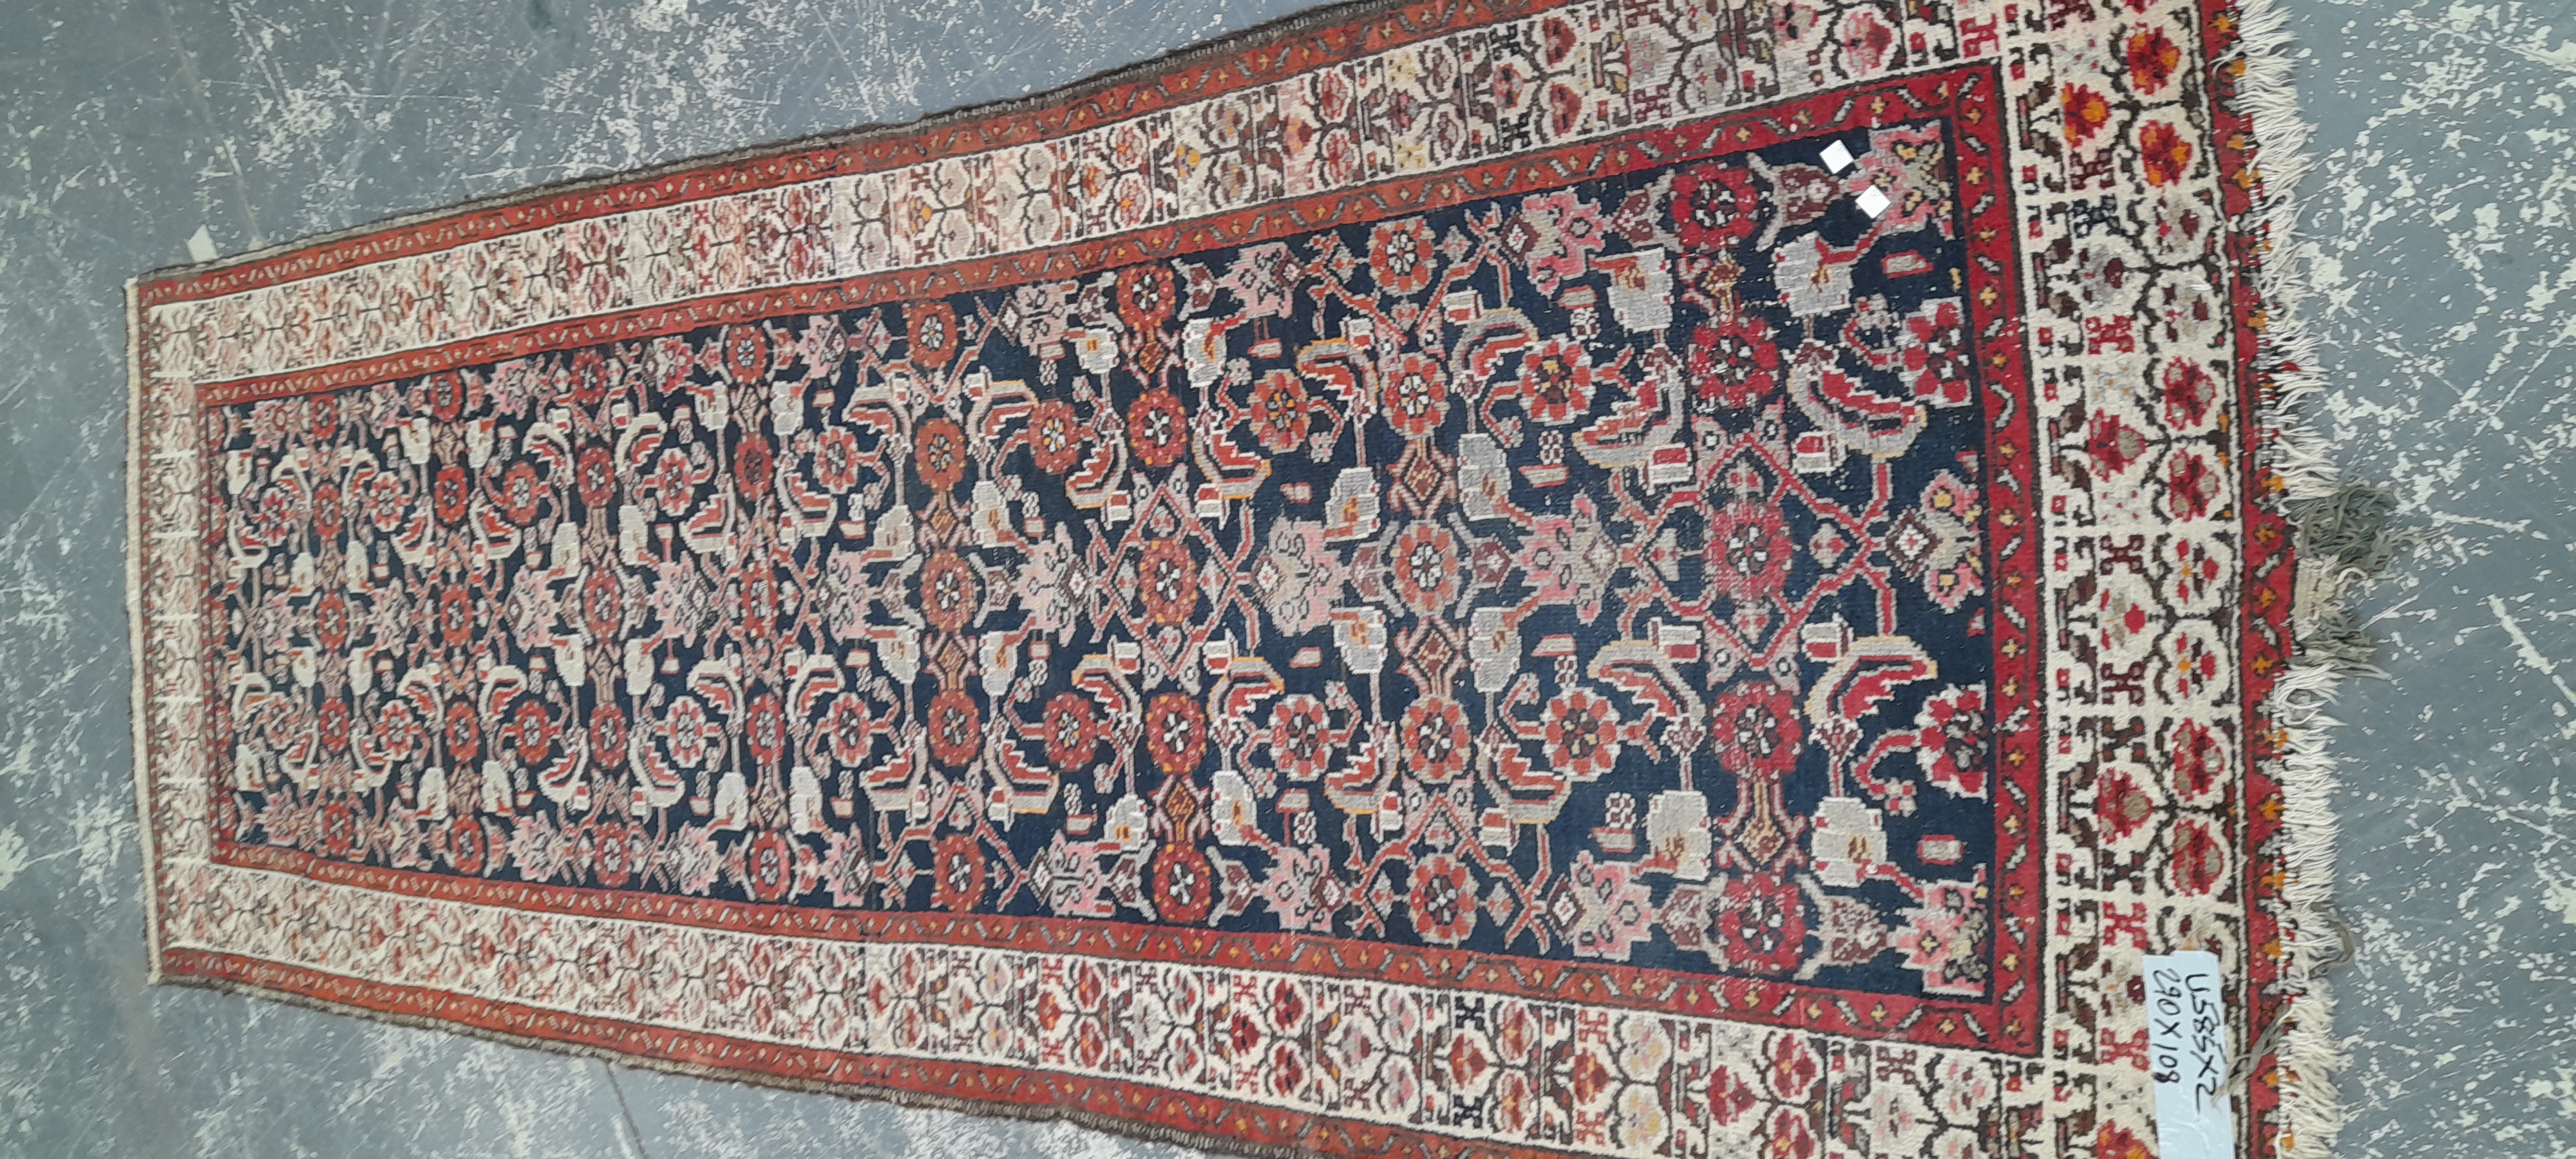 A PERSIAN HAMADAN RUNNER 290 x 108 cm, TOGETHER WITH A MACHINE MADE RUG 189 x 90 cm (2) - Image 2 of 7